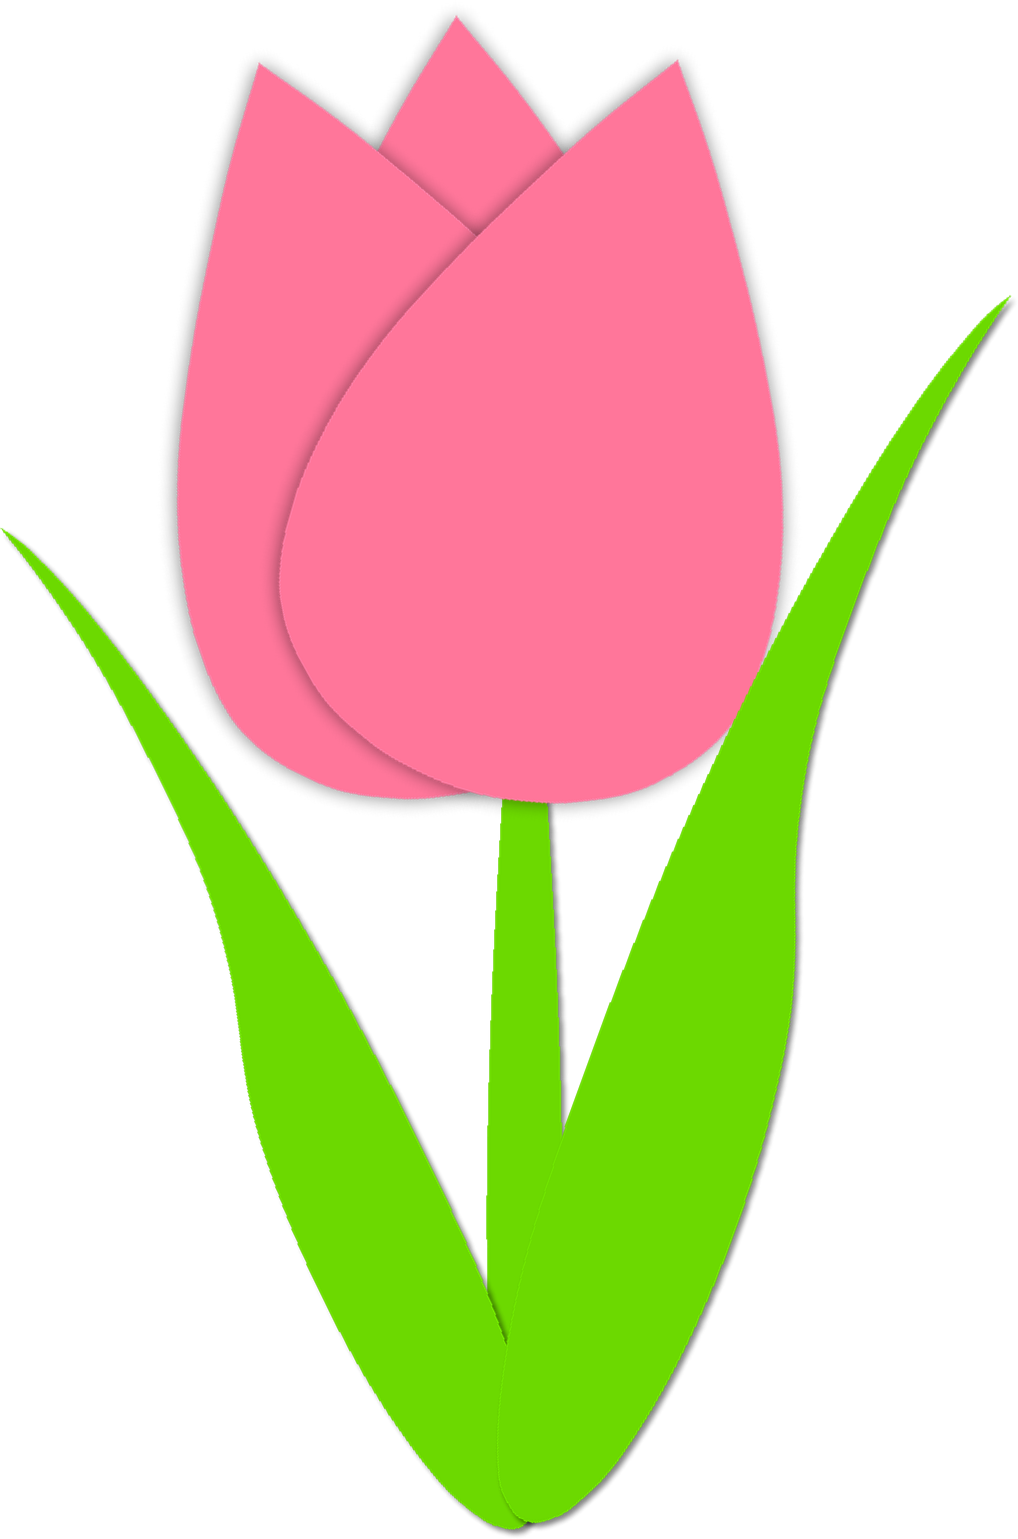 Daisies clipart tulip. Simple outline spring pinterest